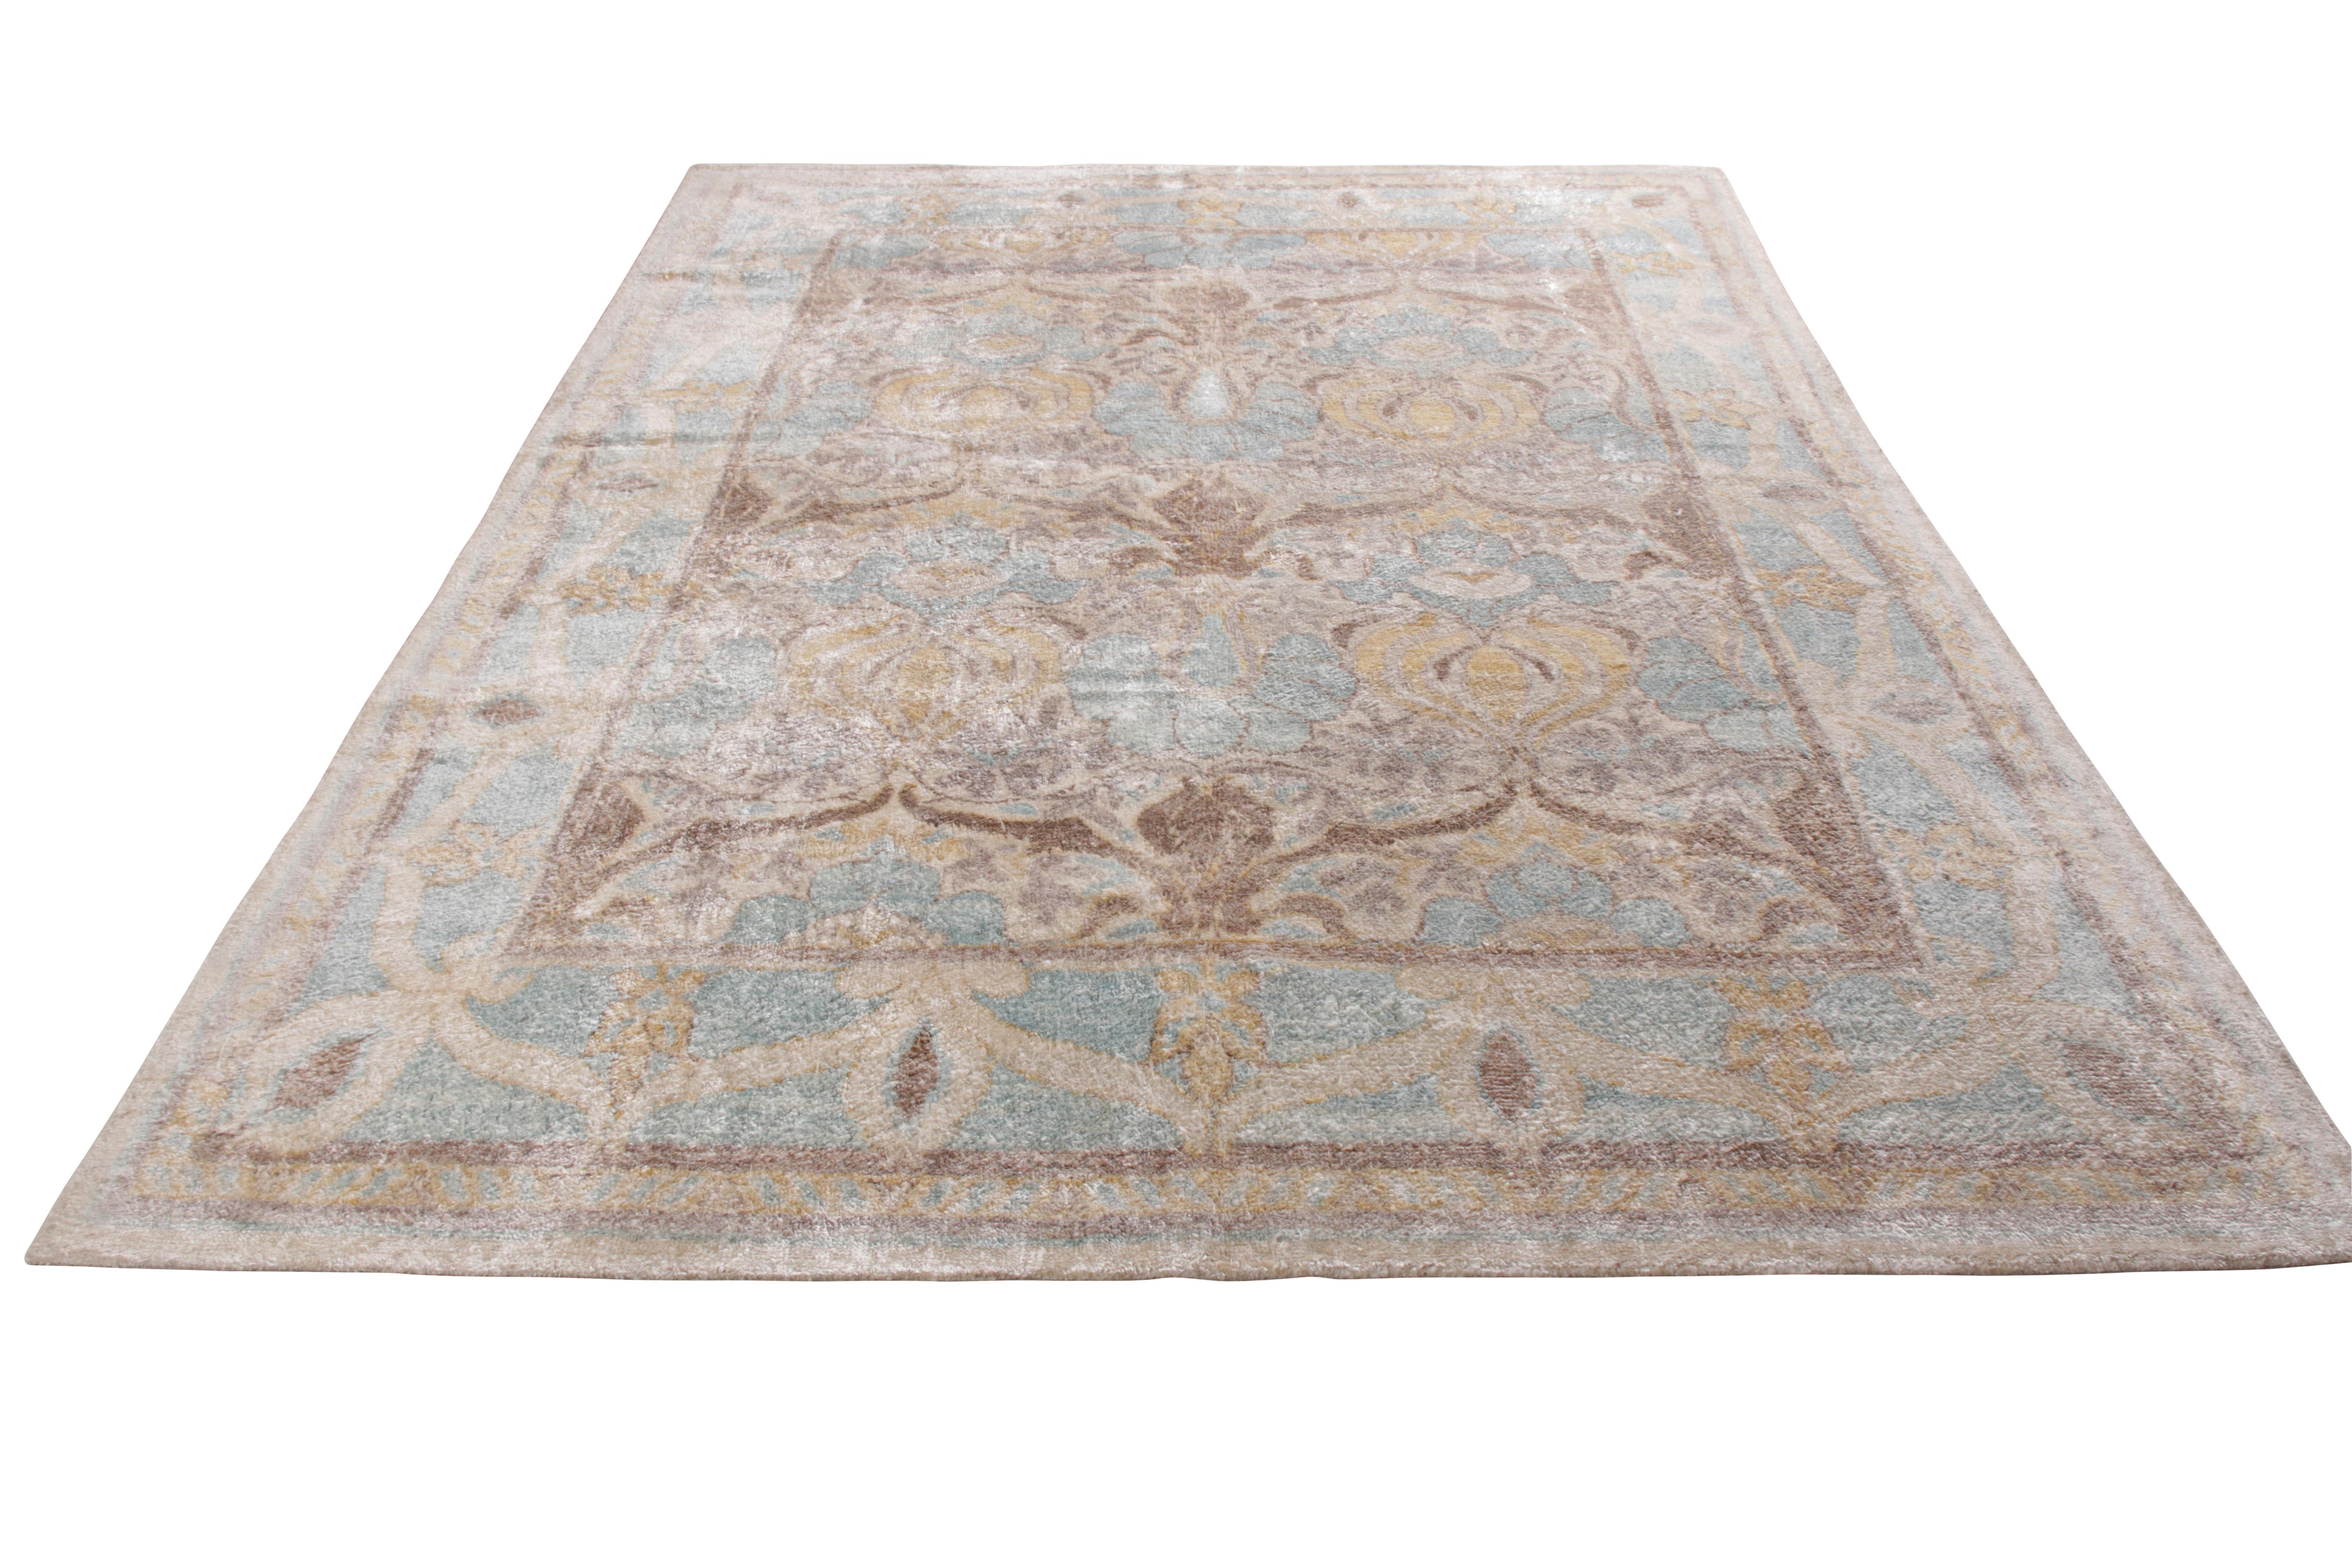 An 8 x 10 ode to unique Oushak rug styles in hand-knotted silk, from Rug & Kilim’s Modern Classics Collection. Inspired by a European take on the celebrated Oriental style, enjoying forgiving blue and beige-brown among the colorway. Exceptional in